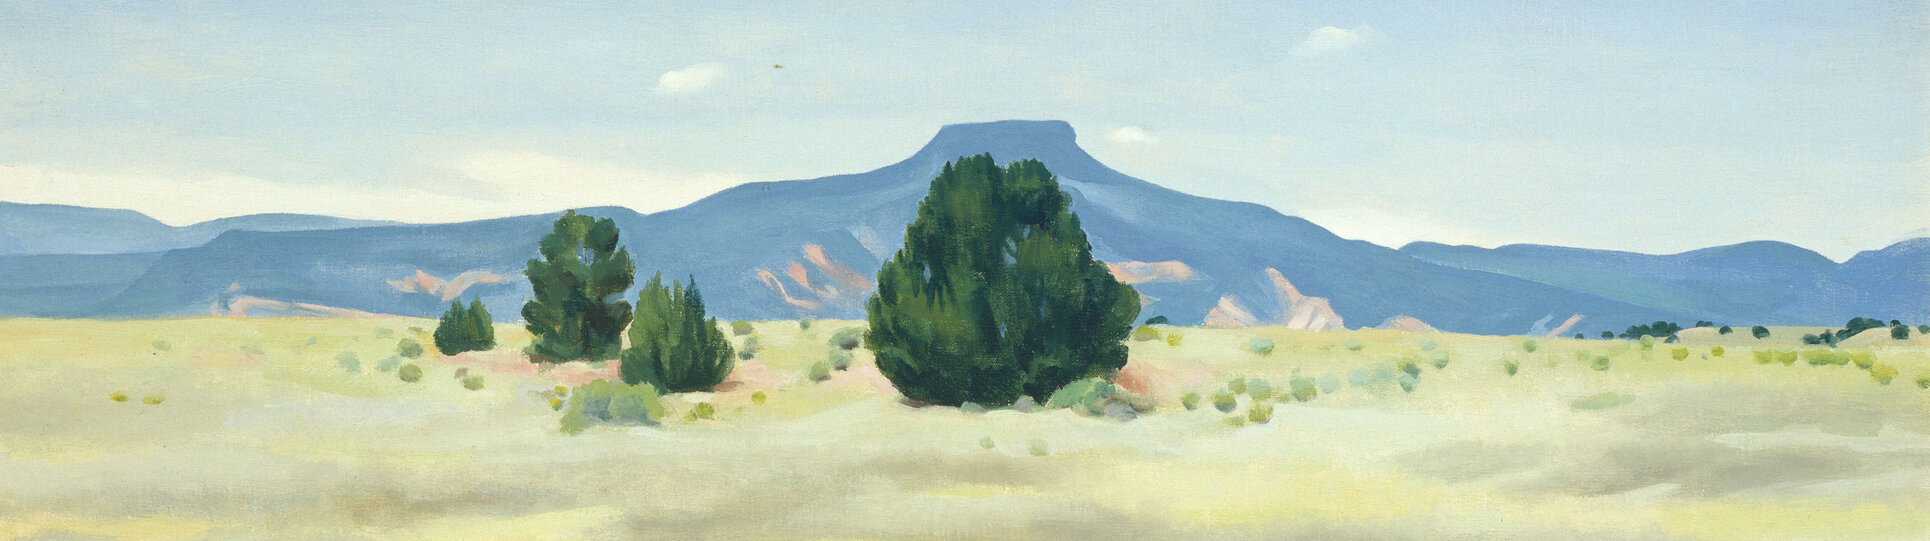 Detail of a painting depicting the landscape of New Mexico with mountains in the distance